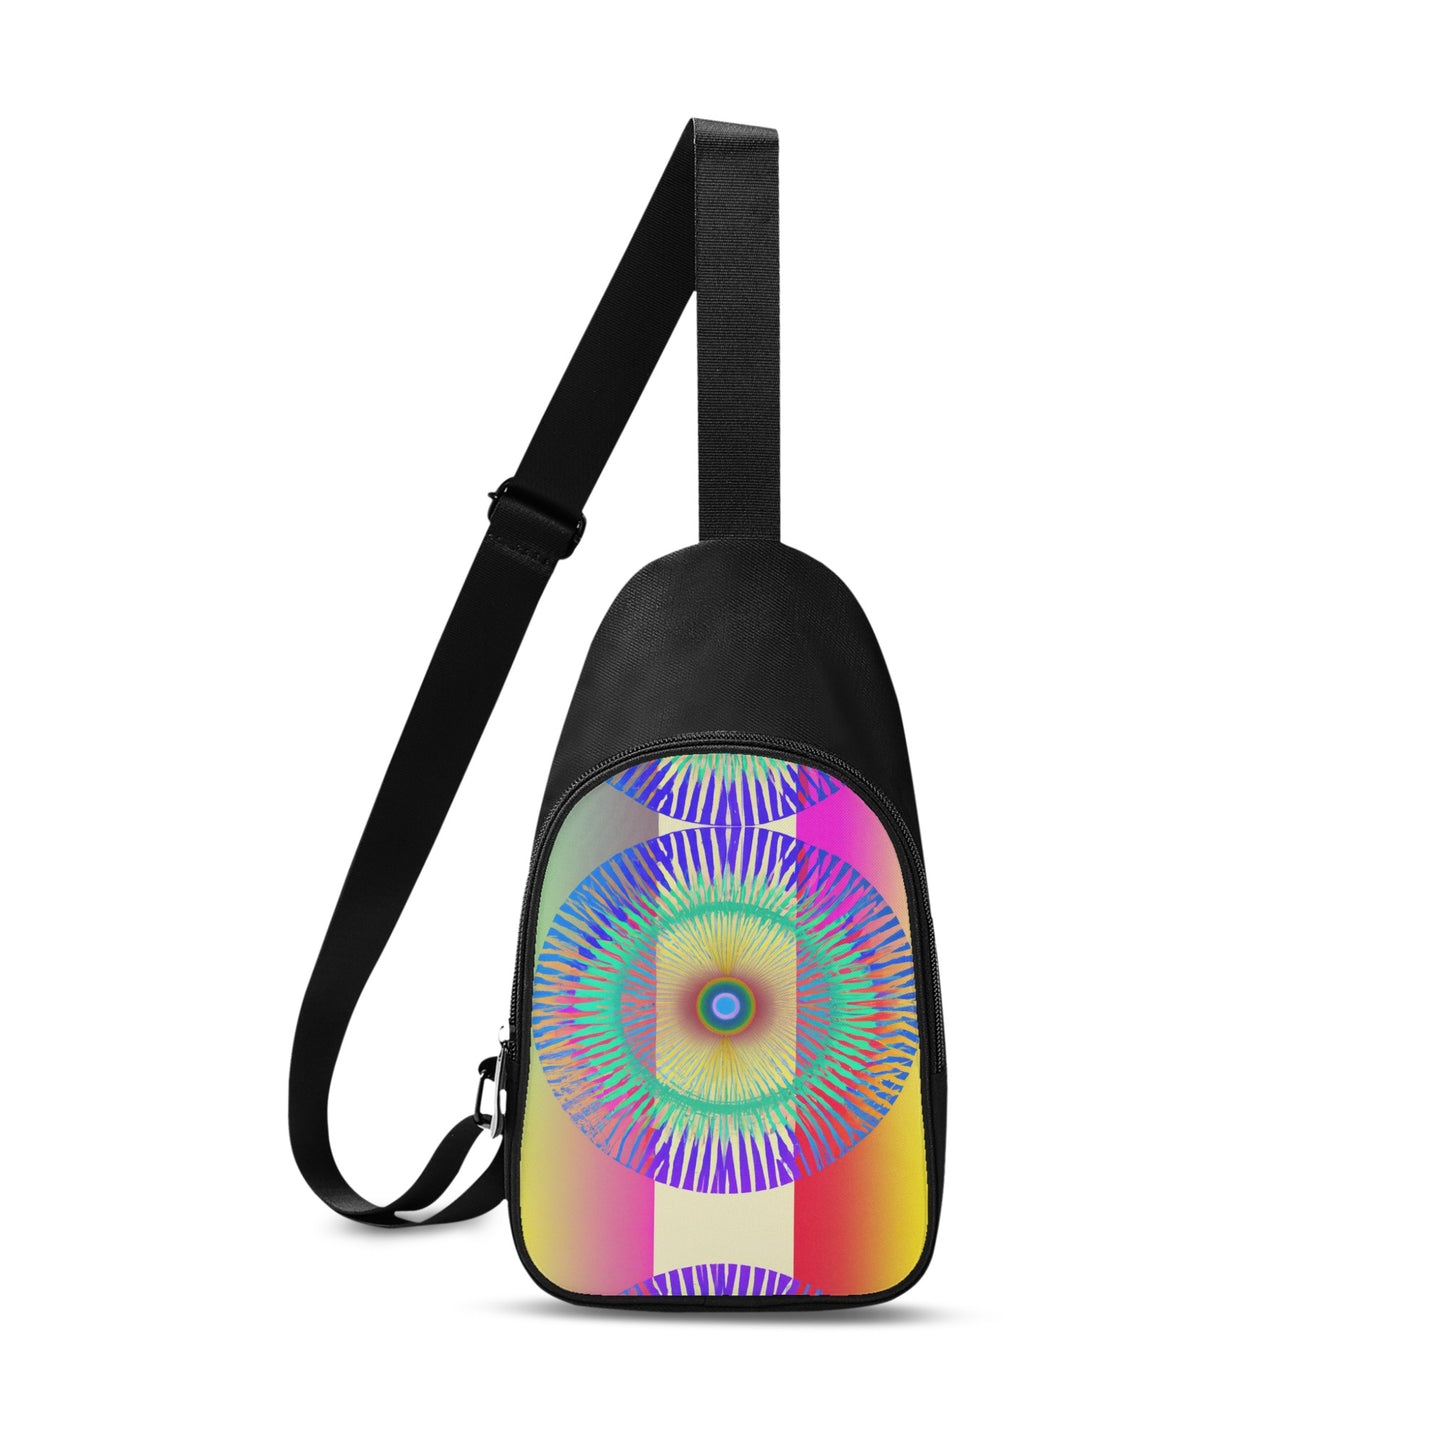 This unisex chest bag will leave you inspired thanks to its groovy digitally printed design of a psychedelic iris on the front! How mesmerizing!